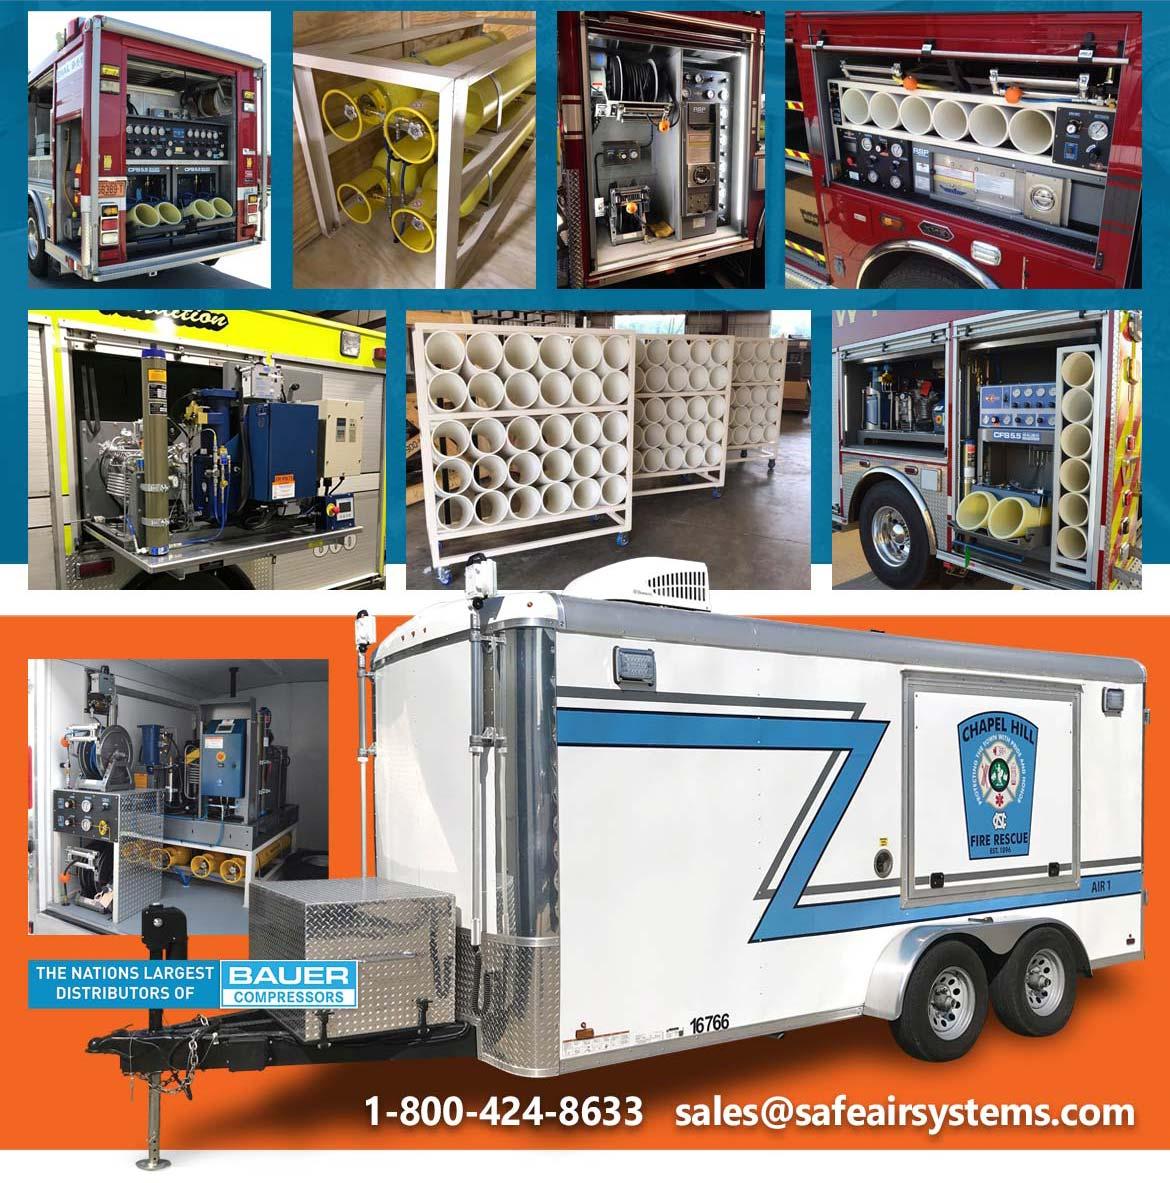 Safe Air Systems offers Air Control Panels, Minor and Major Fire Apparatus Up-Fits for your needs.